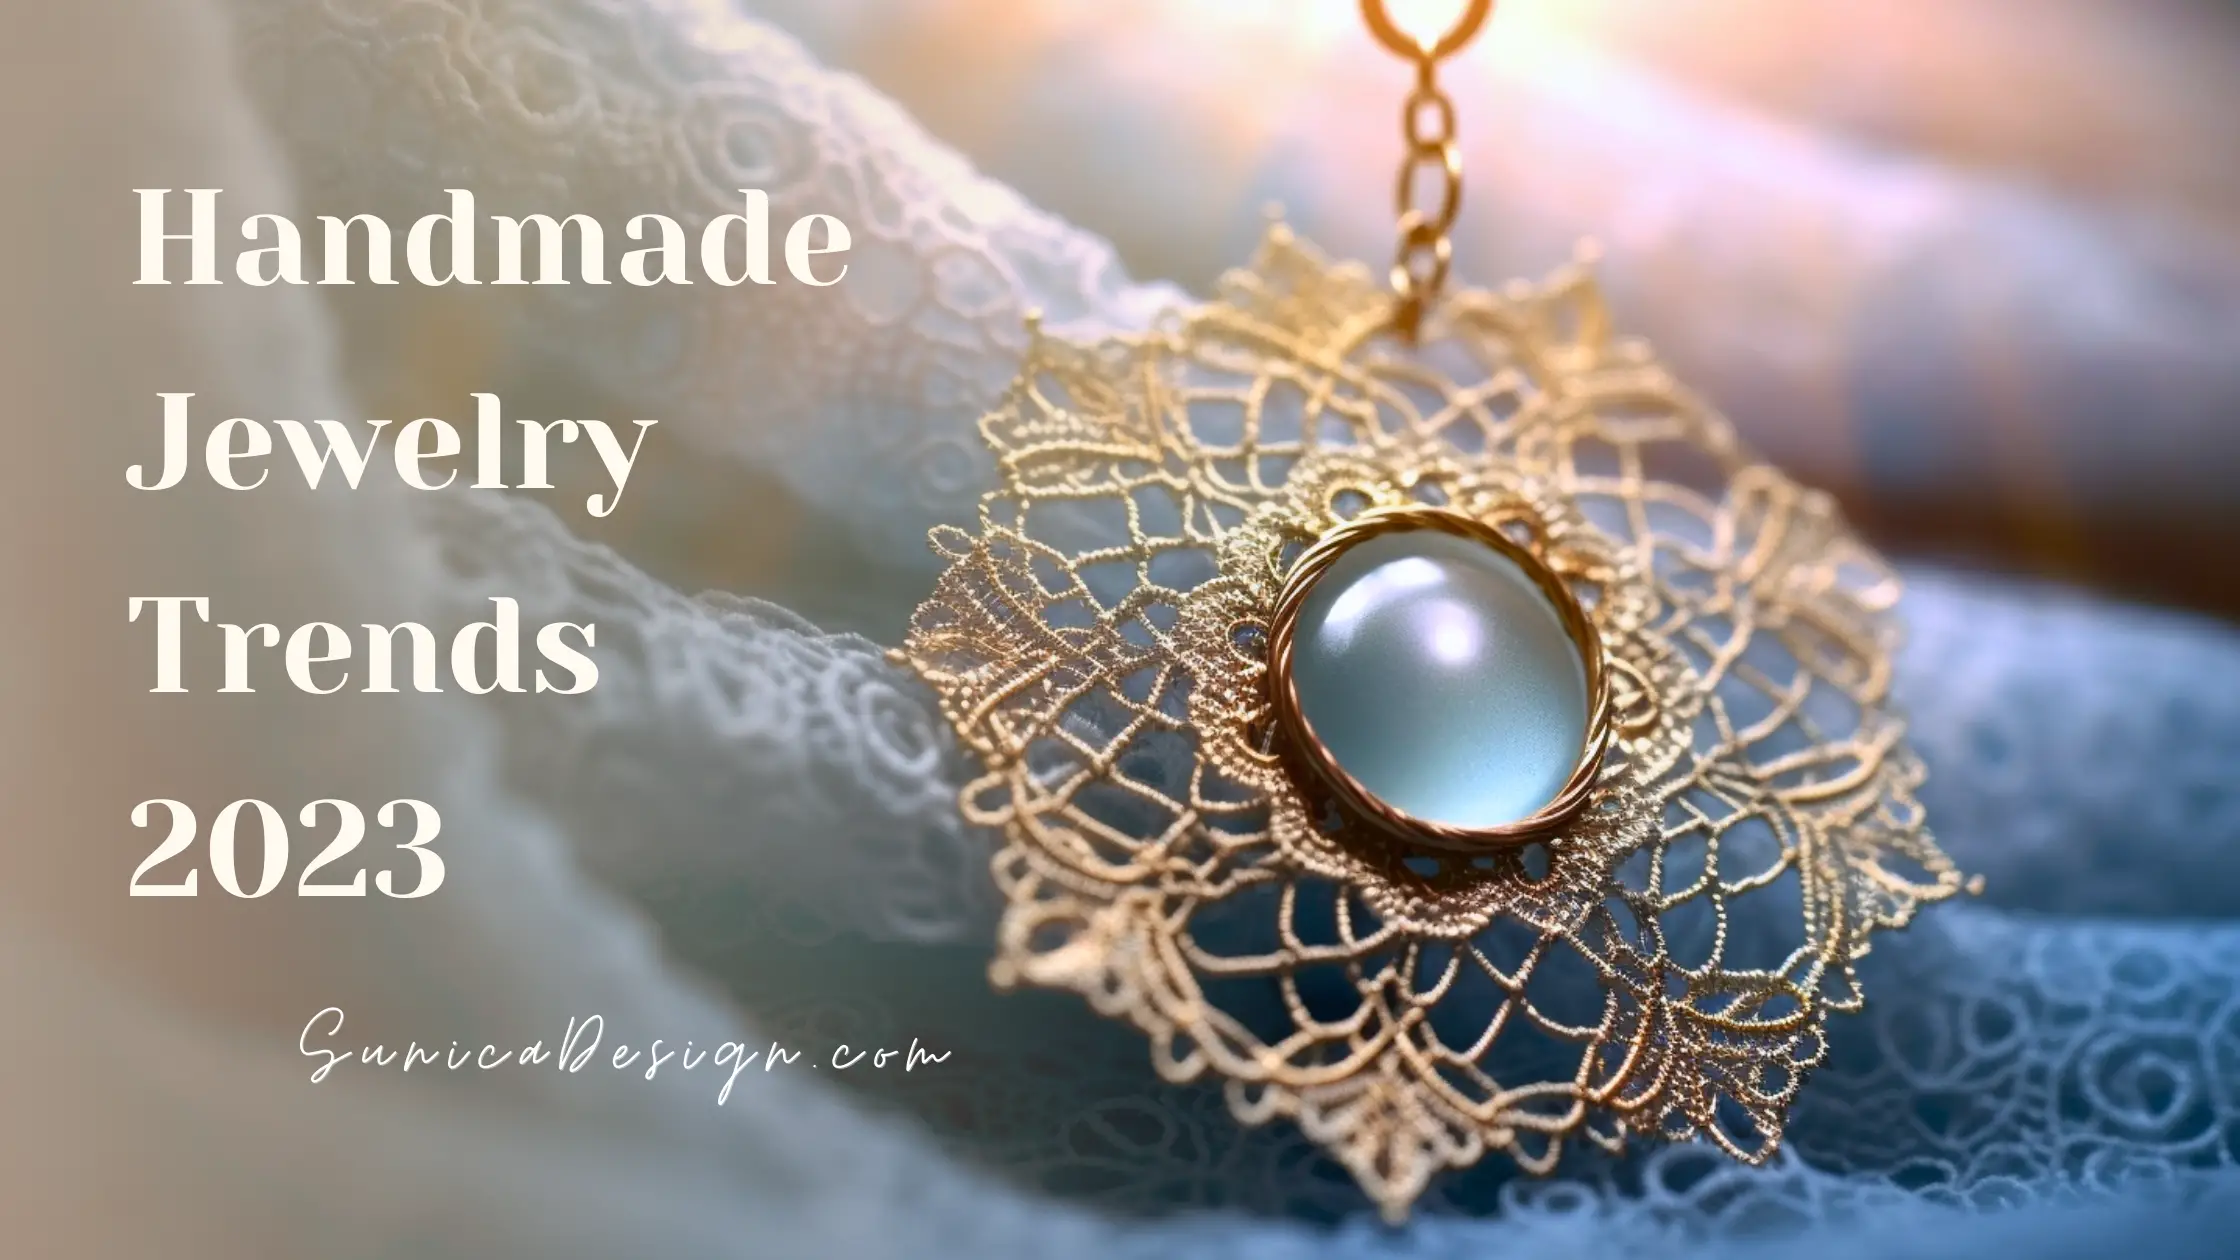 What are the Handmade Jewelry Trends for 2023? – We Love Brass